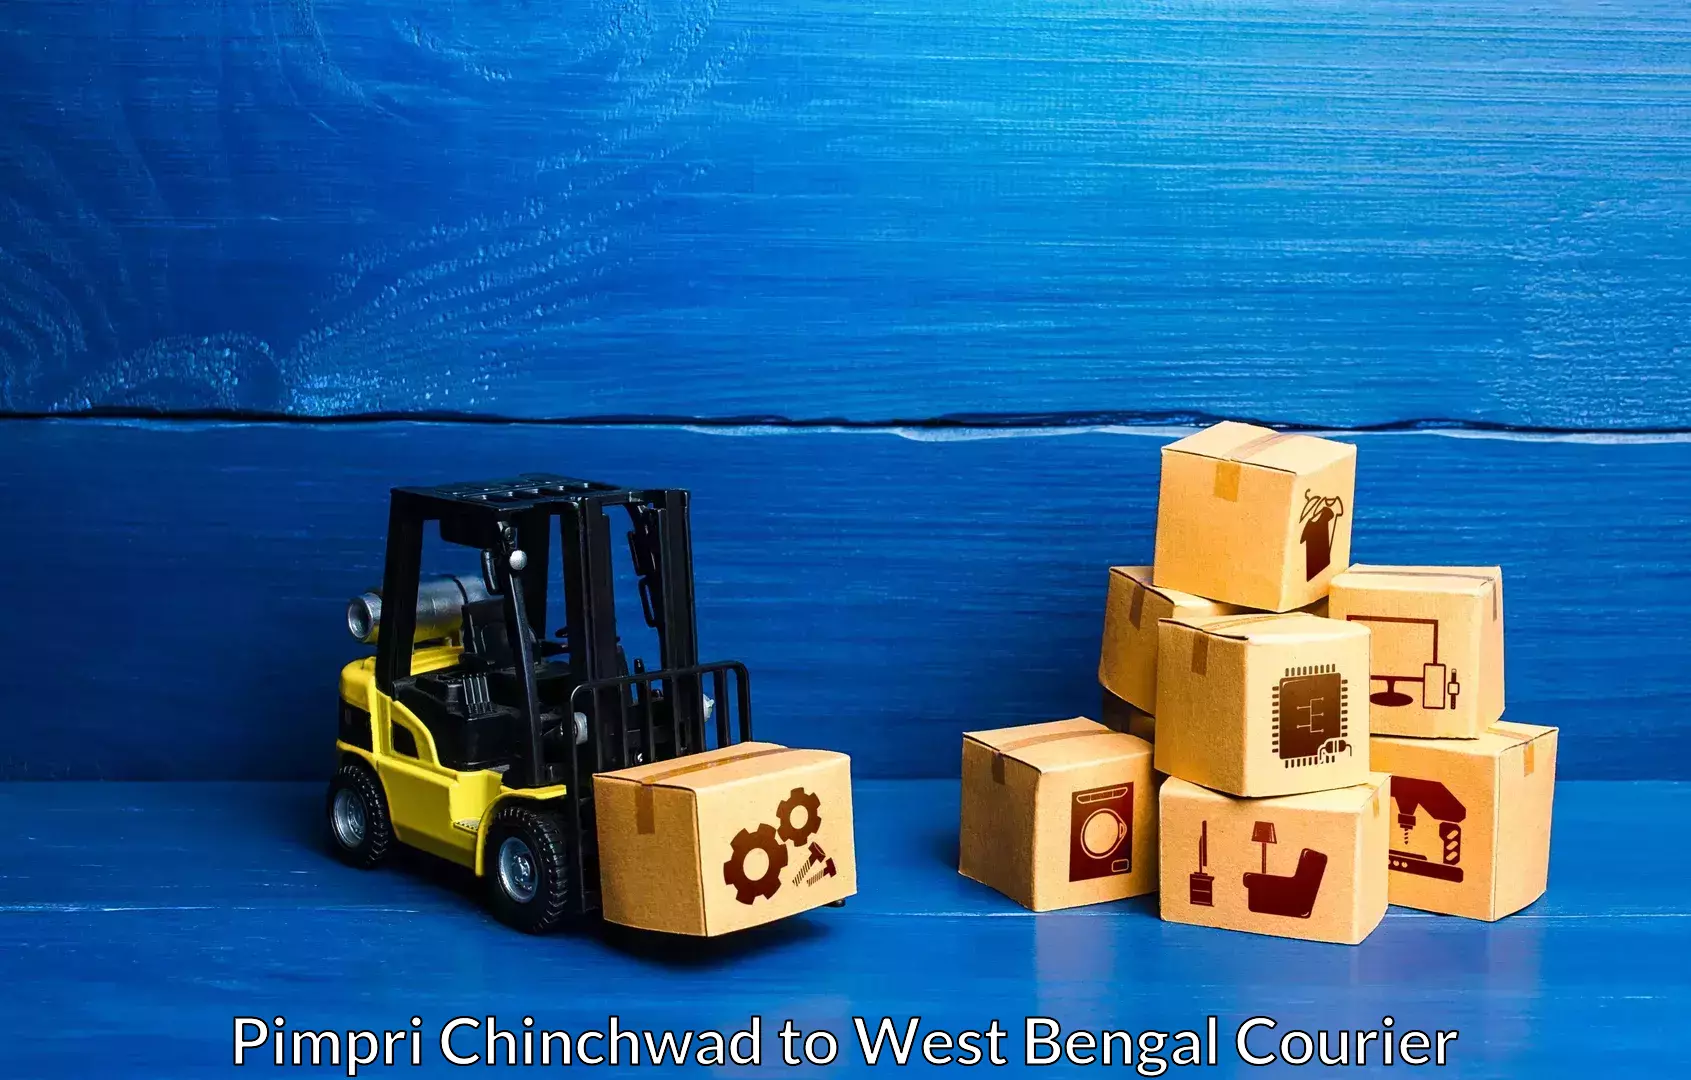 Furniture moving specialists Pimpri Chinchwad to West Bengal